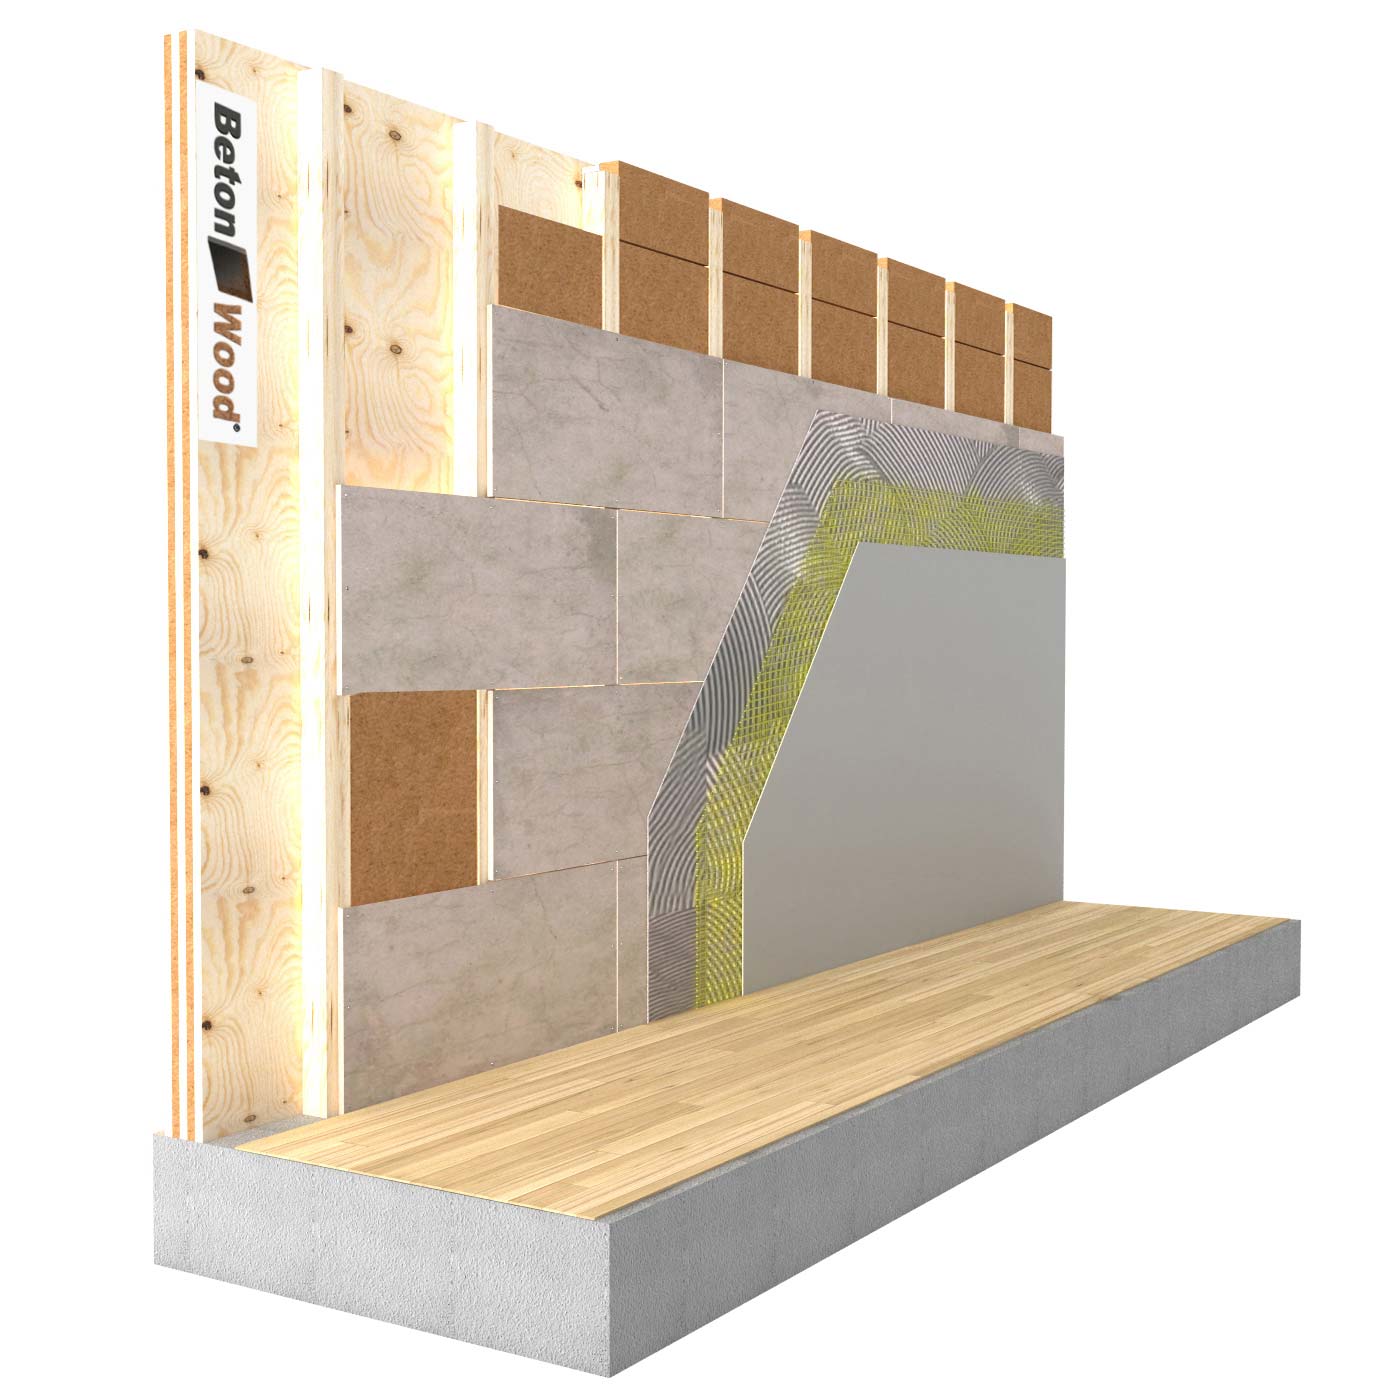 Internal insulation system with Therm dry wood fiber on wooden walls